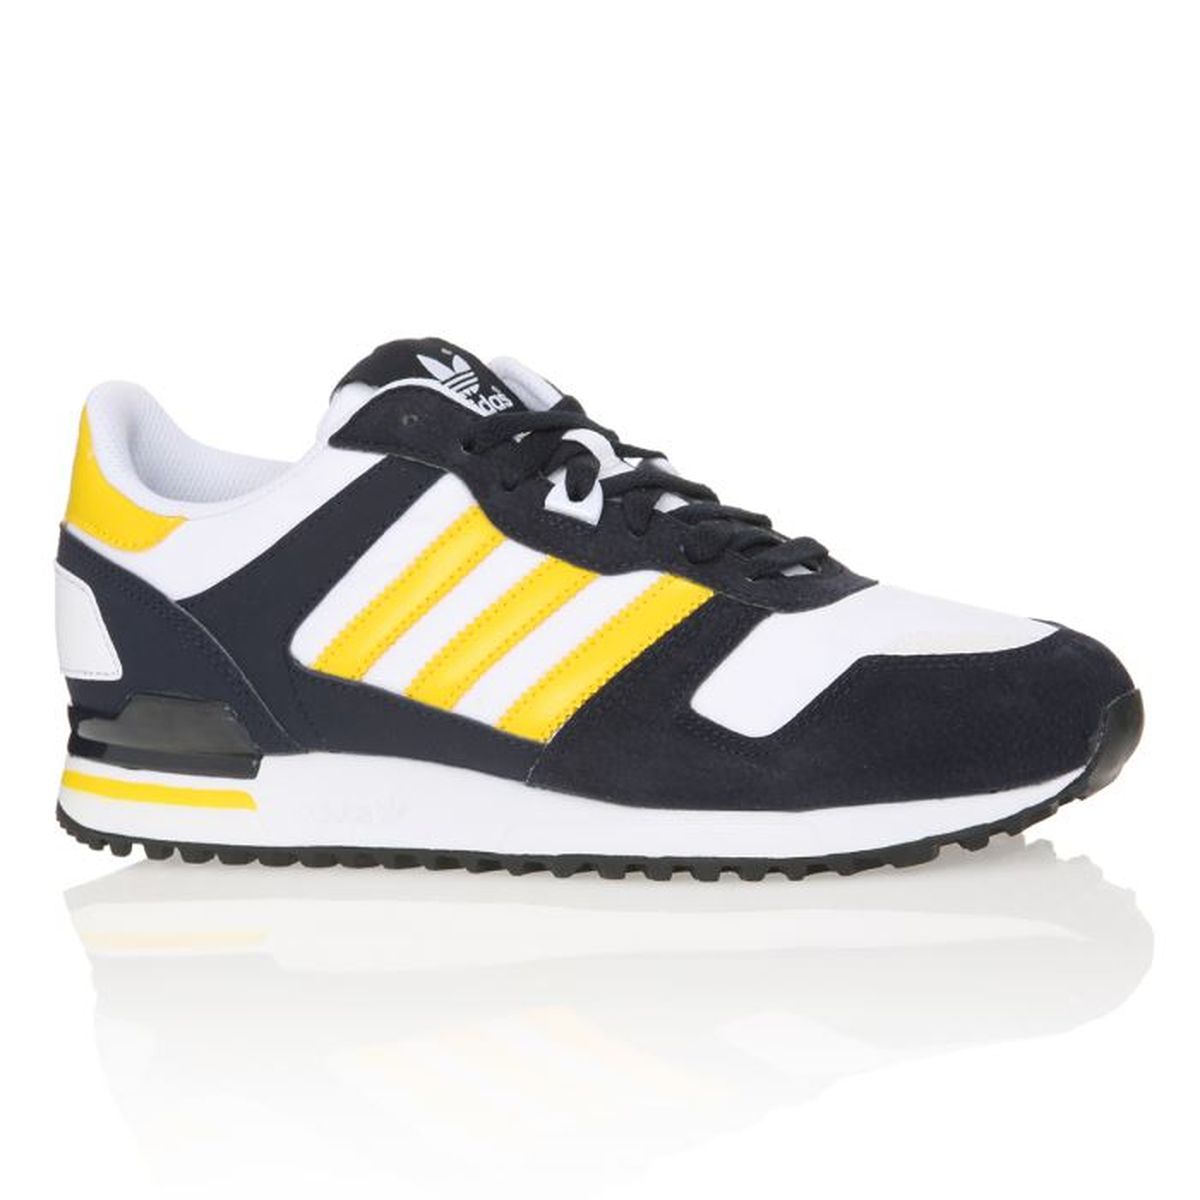 adidas zx 700 homme france